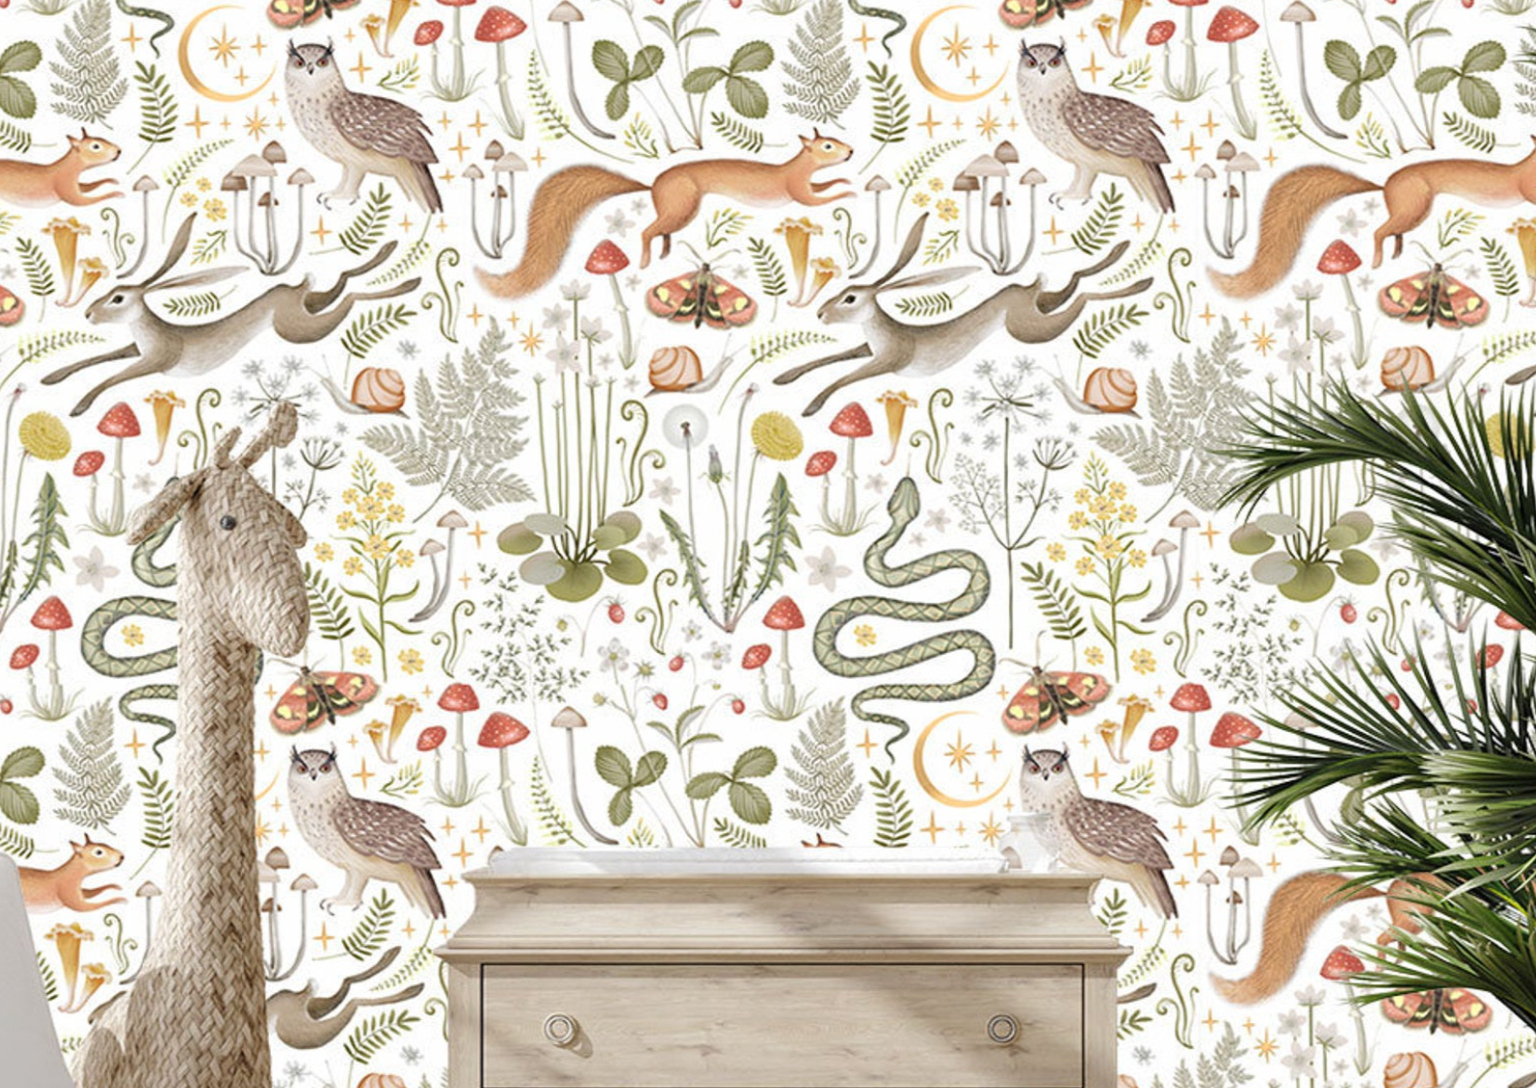 Magical Woodland Forest - Nursery Wall Decor Wallpapers